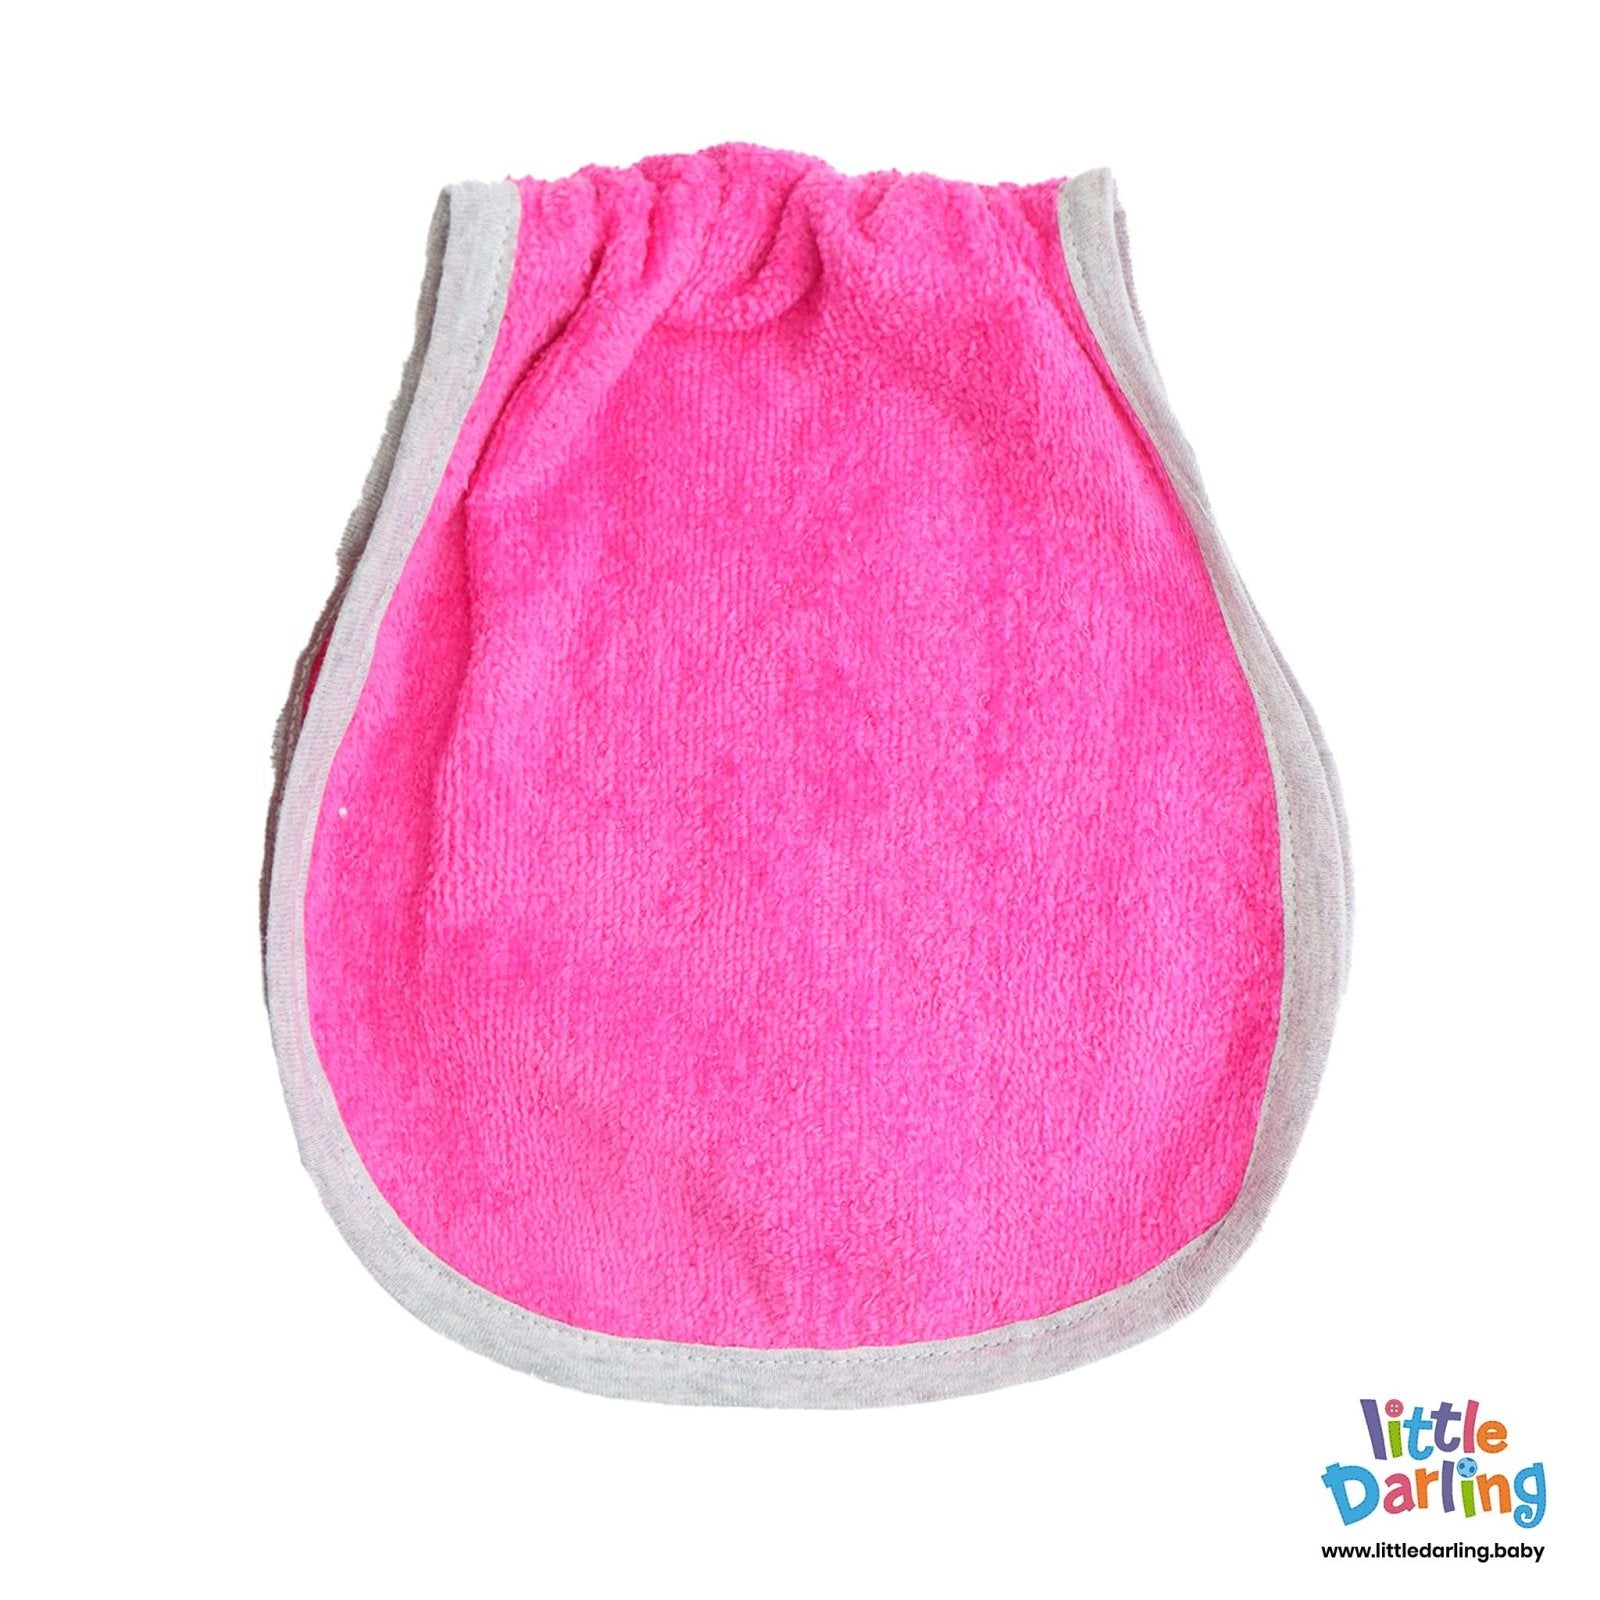 Baby Burp Cloth 2 Pcs Light Pink Color by Little Darling